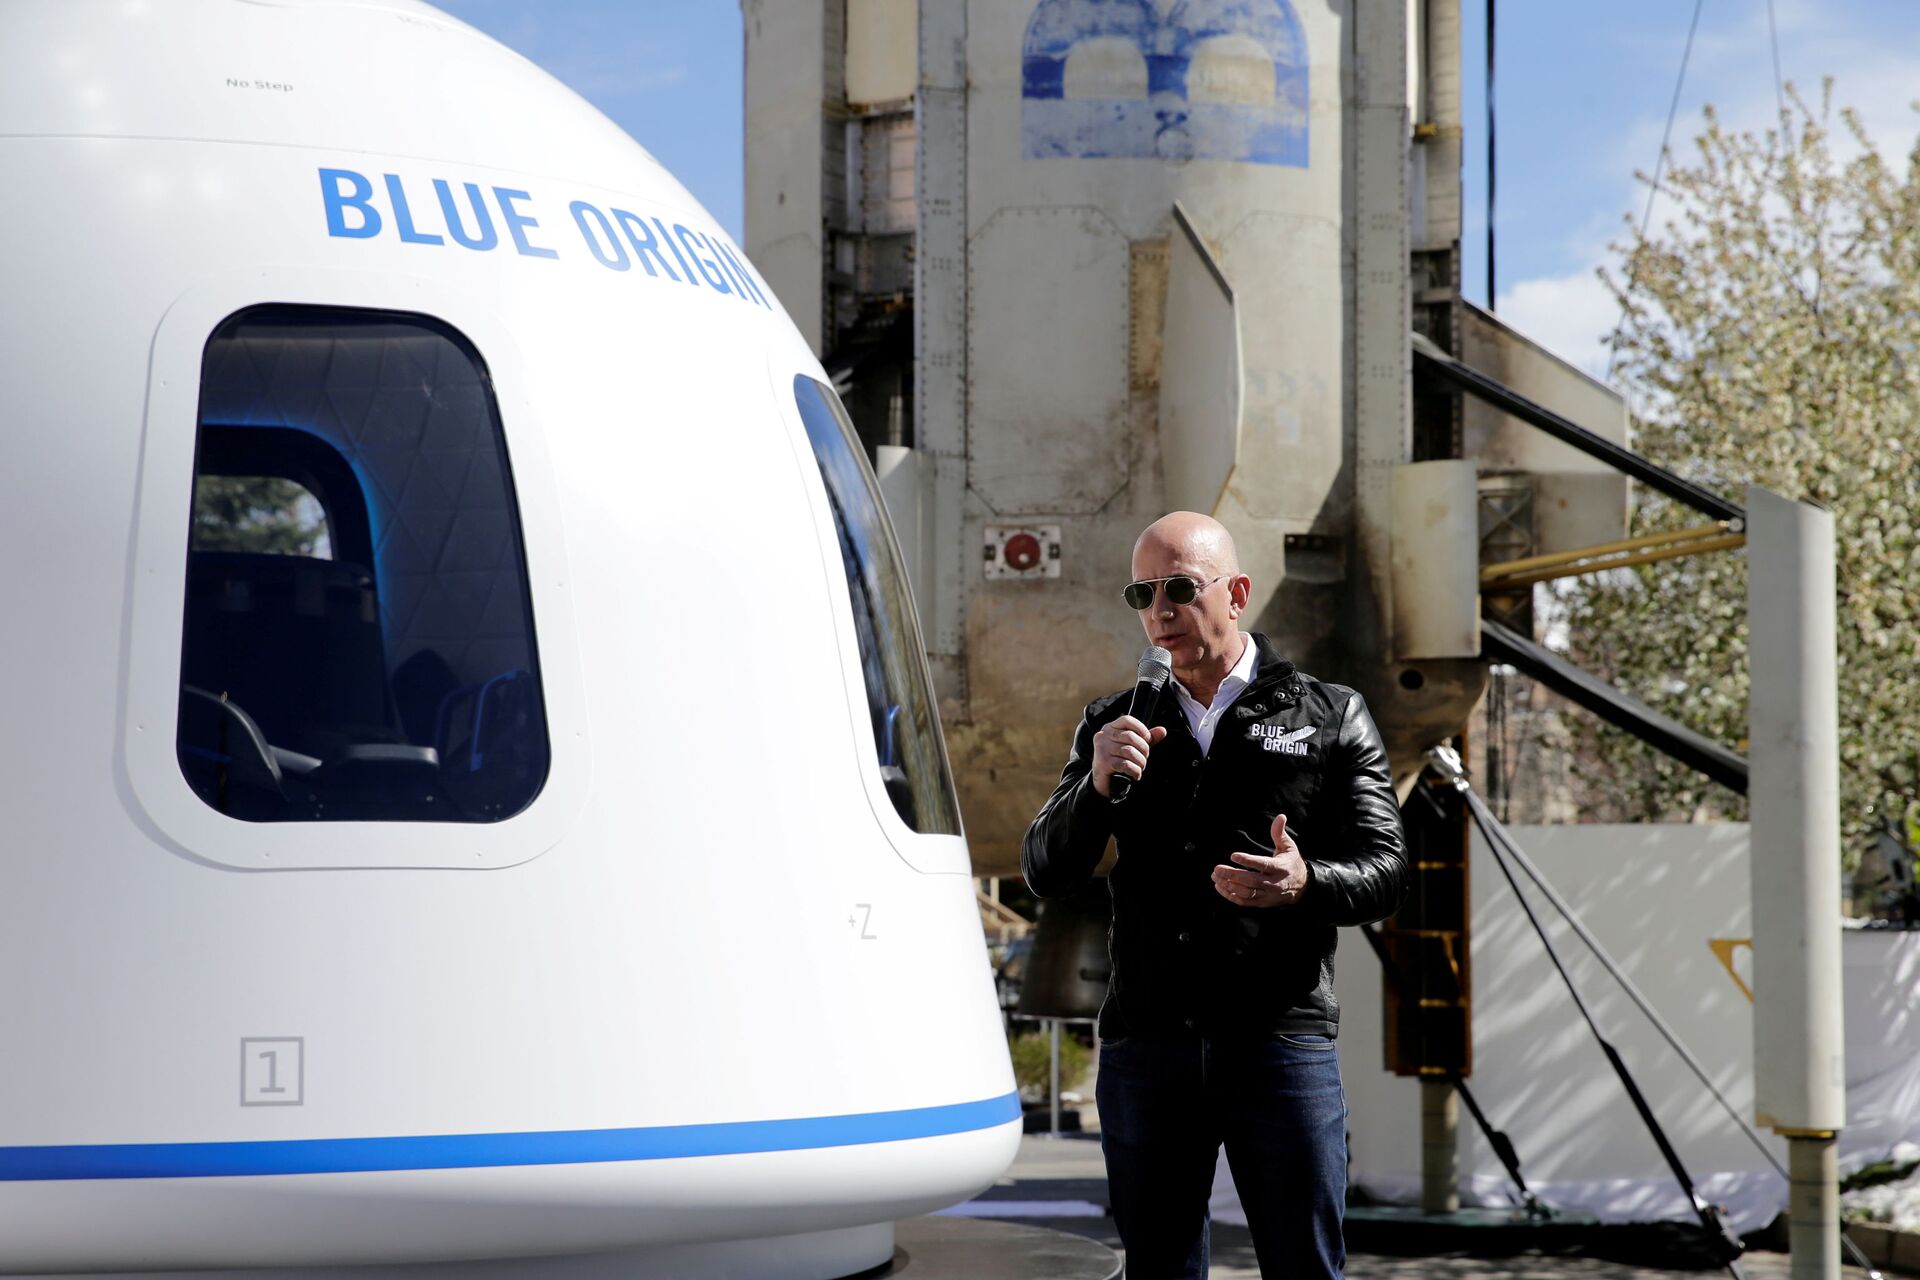 Mysterious Space Tourist Pays $28 Mln for Rocket Trip Beyond Earth With Jeff Bezos, Reports Say - Sputnik International, 1920, 14.06.2021